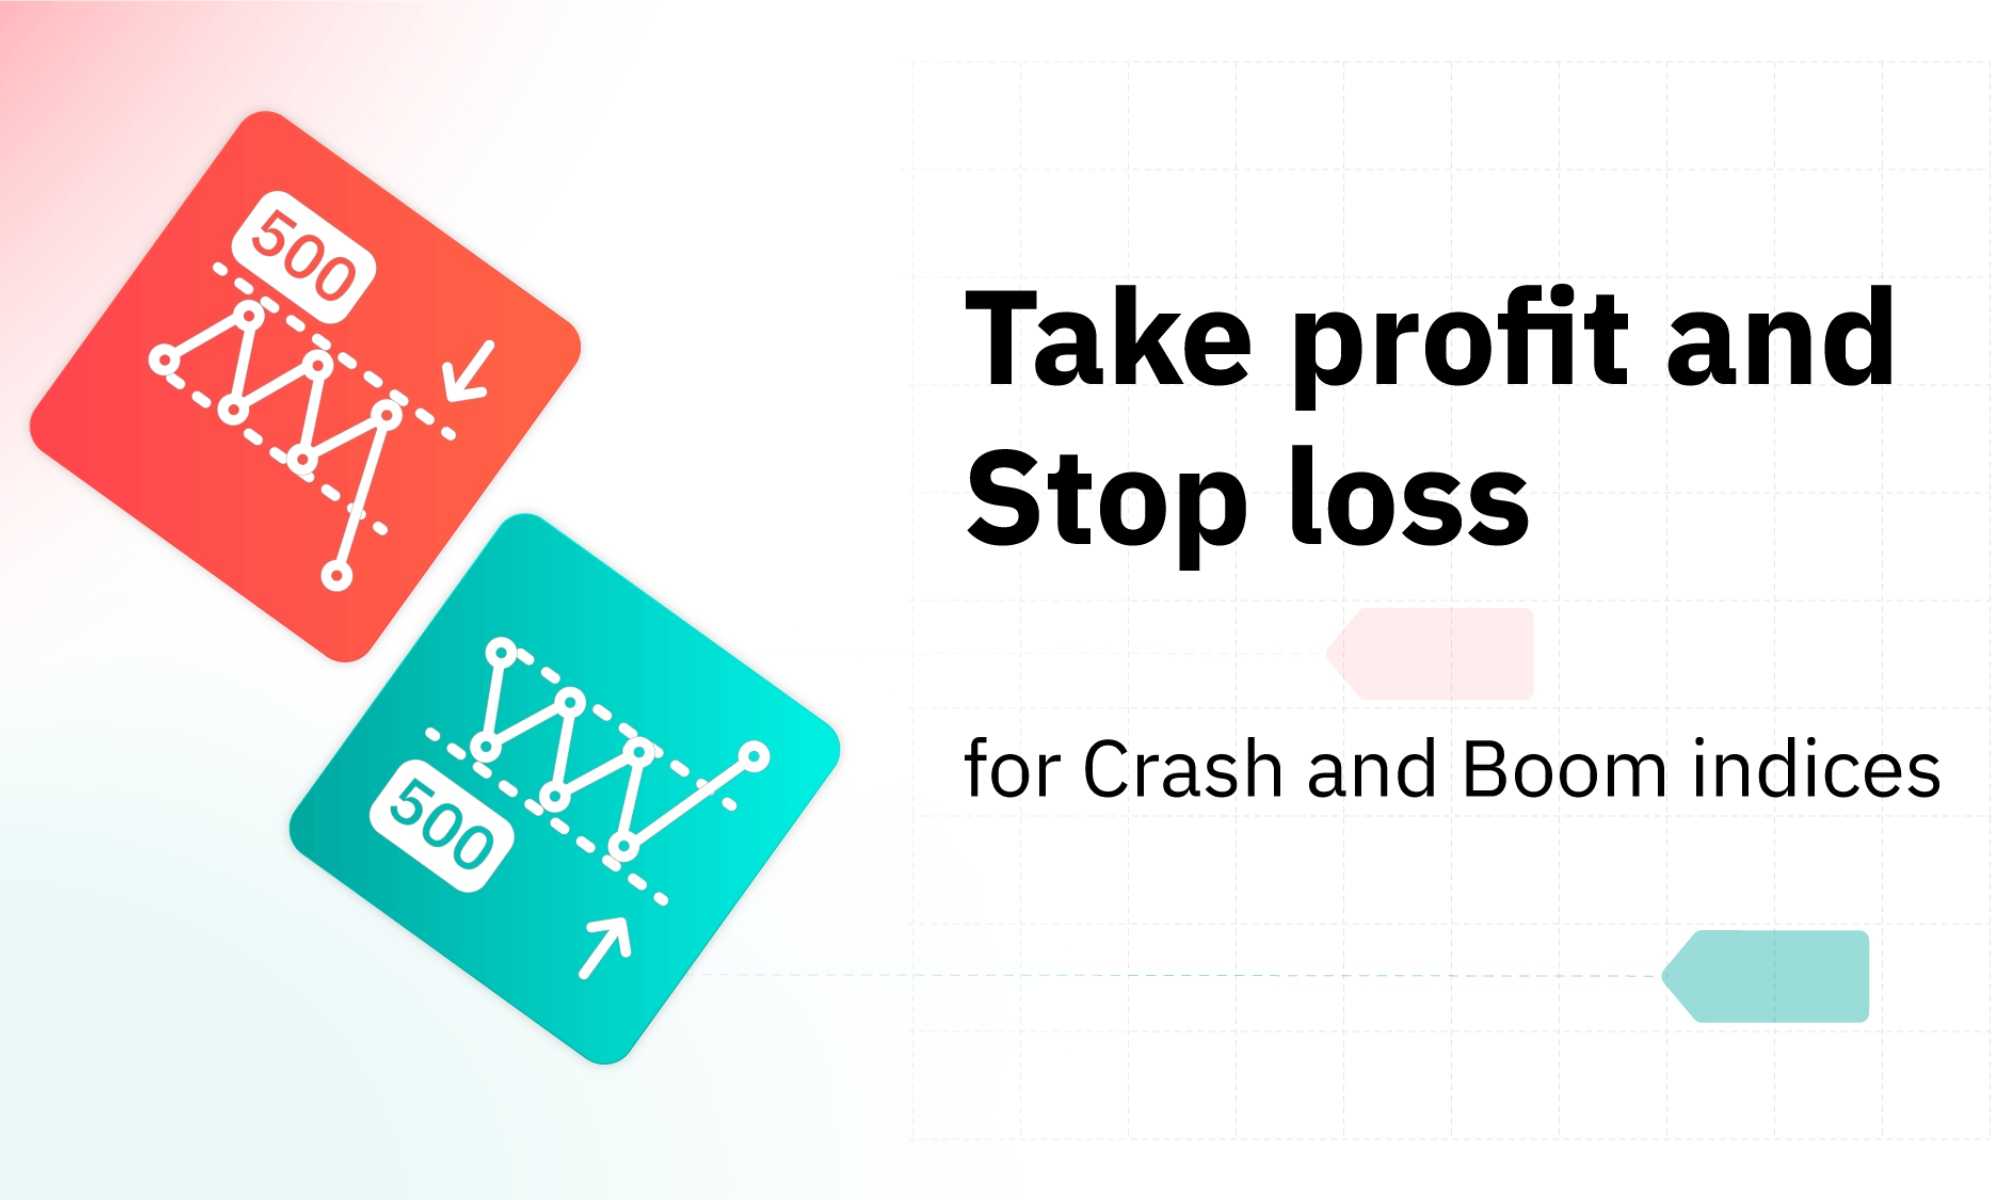 Discover how take profit and stop loss work on Crash/Boom synthetic indices on Deriv.